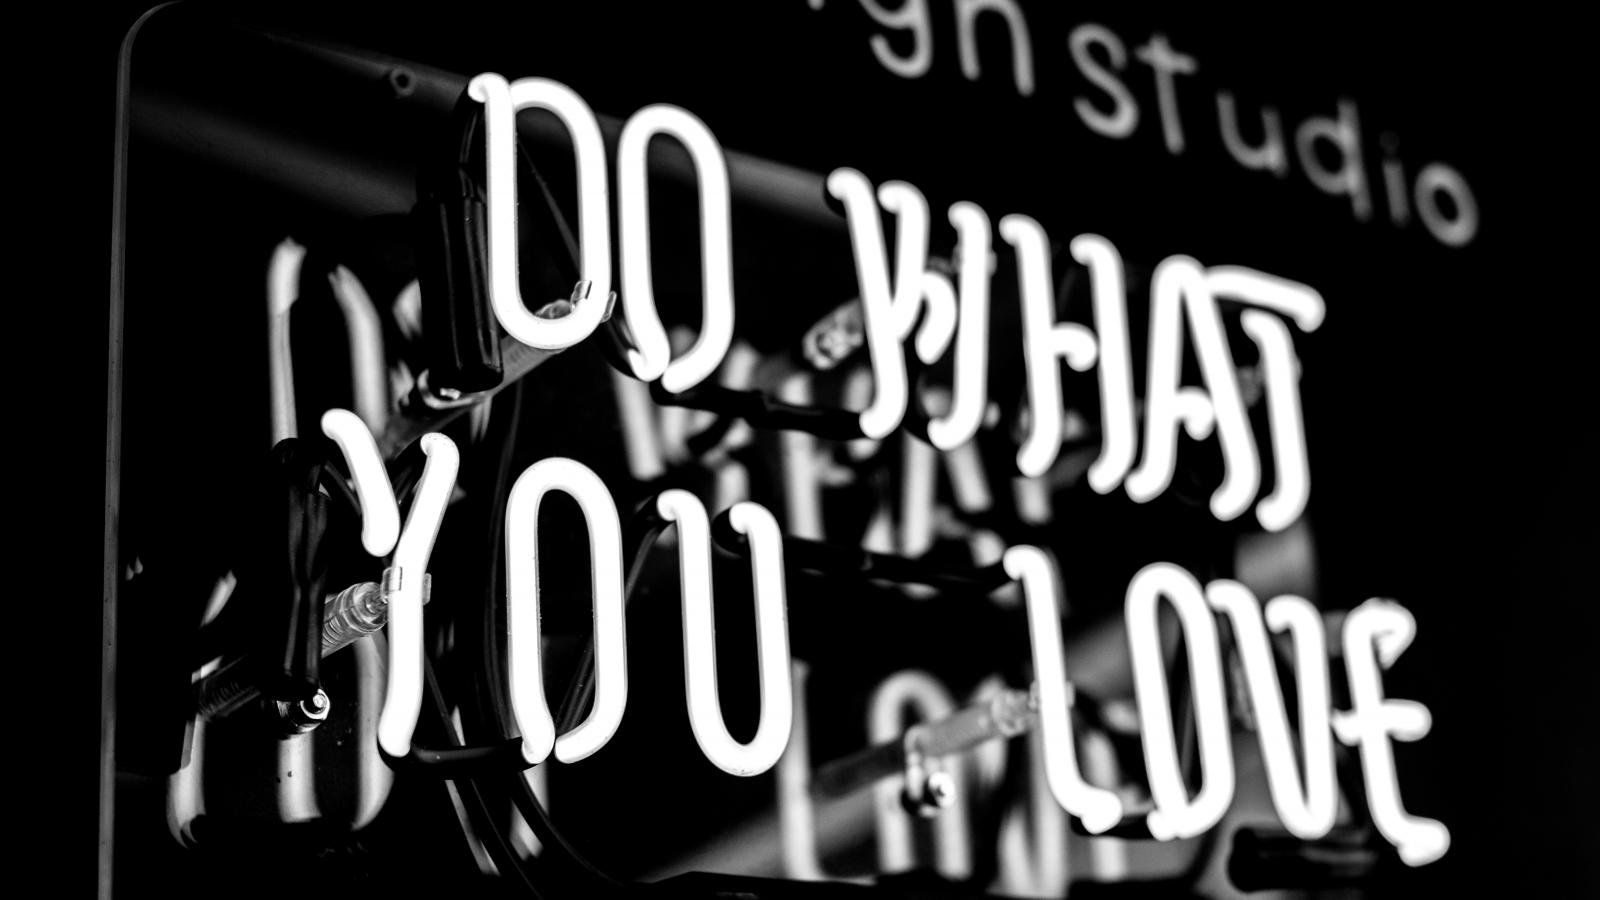 Leuchtreklame "Do what you love"